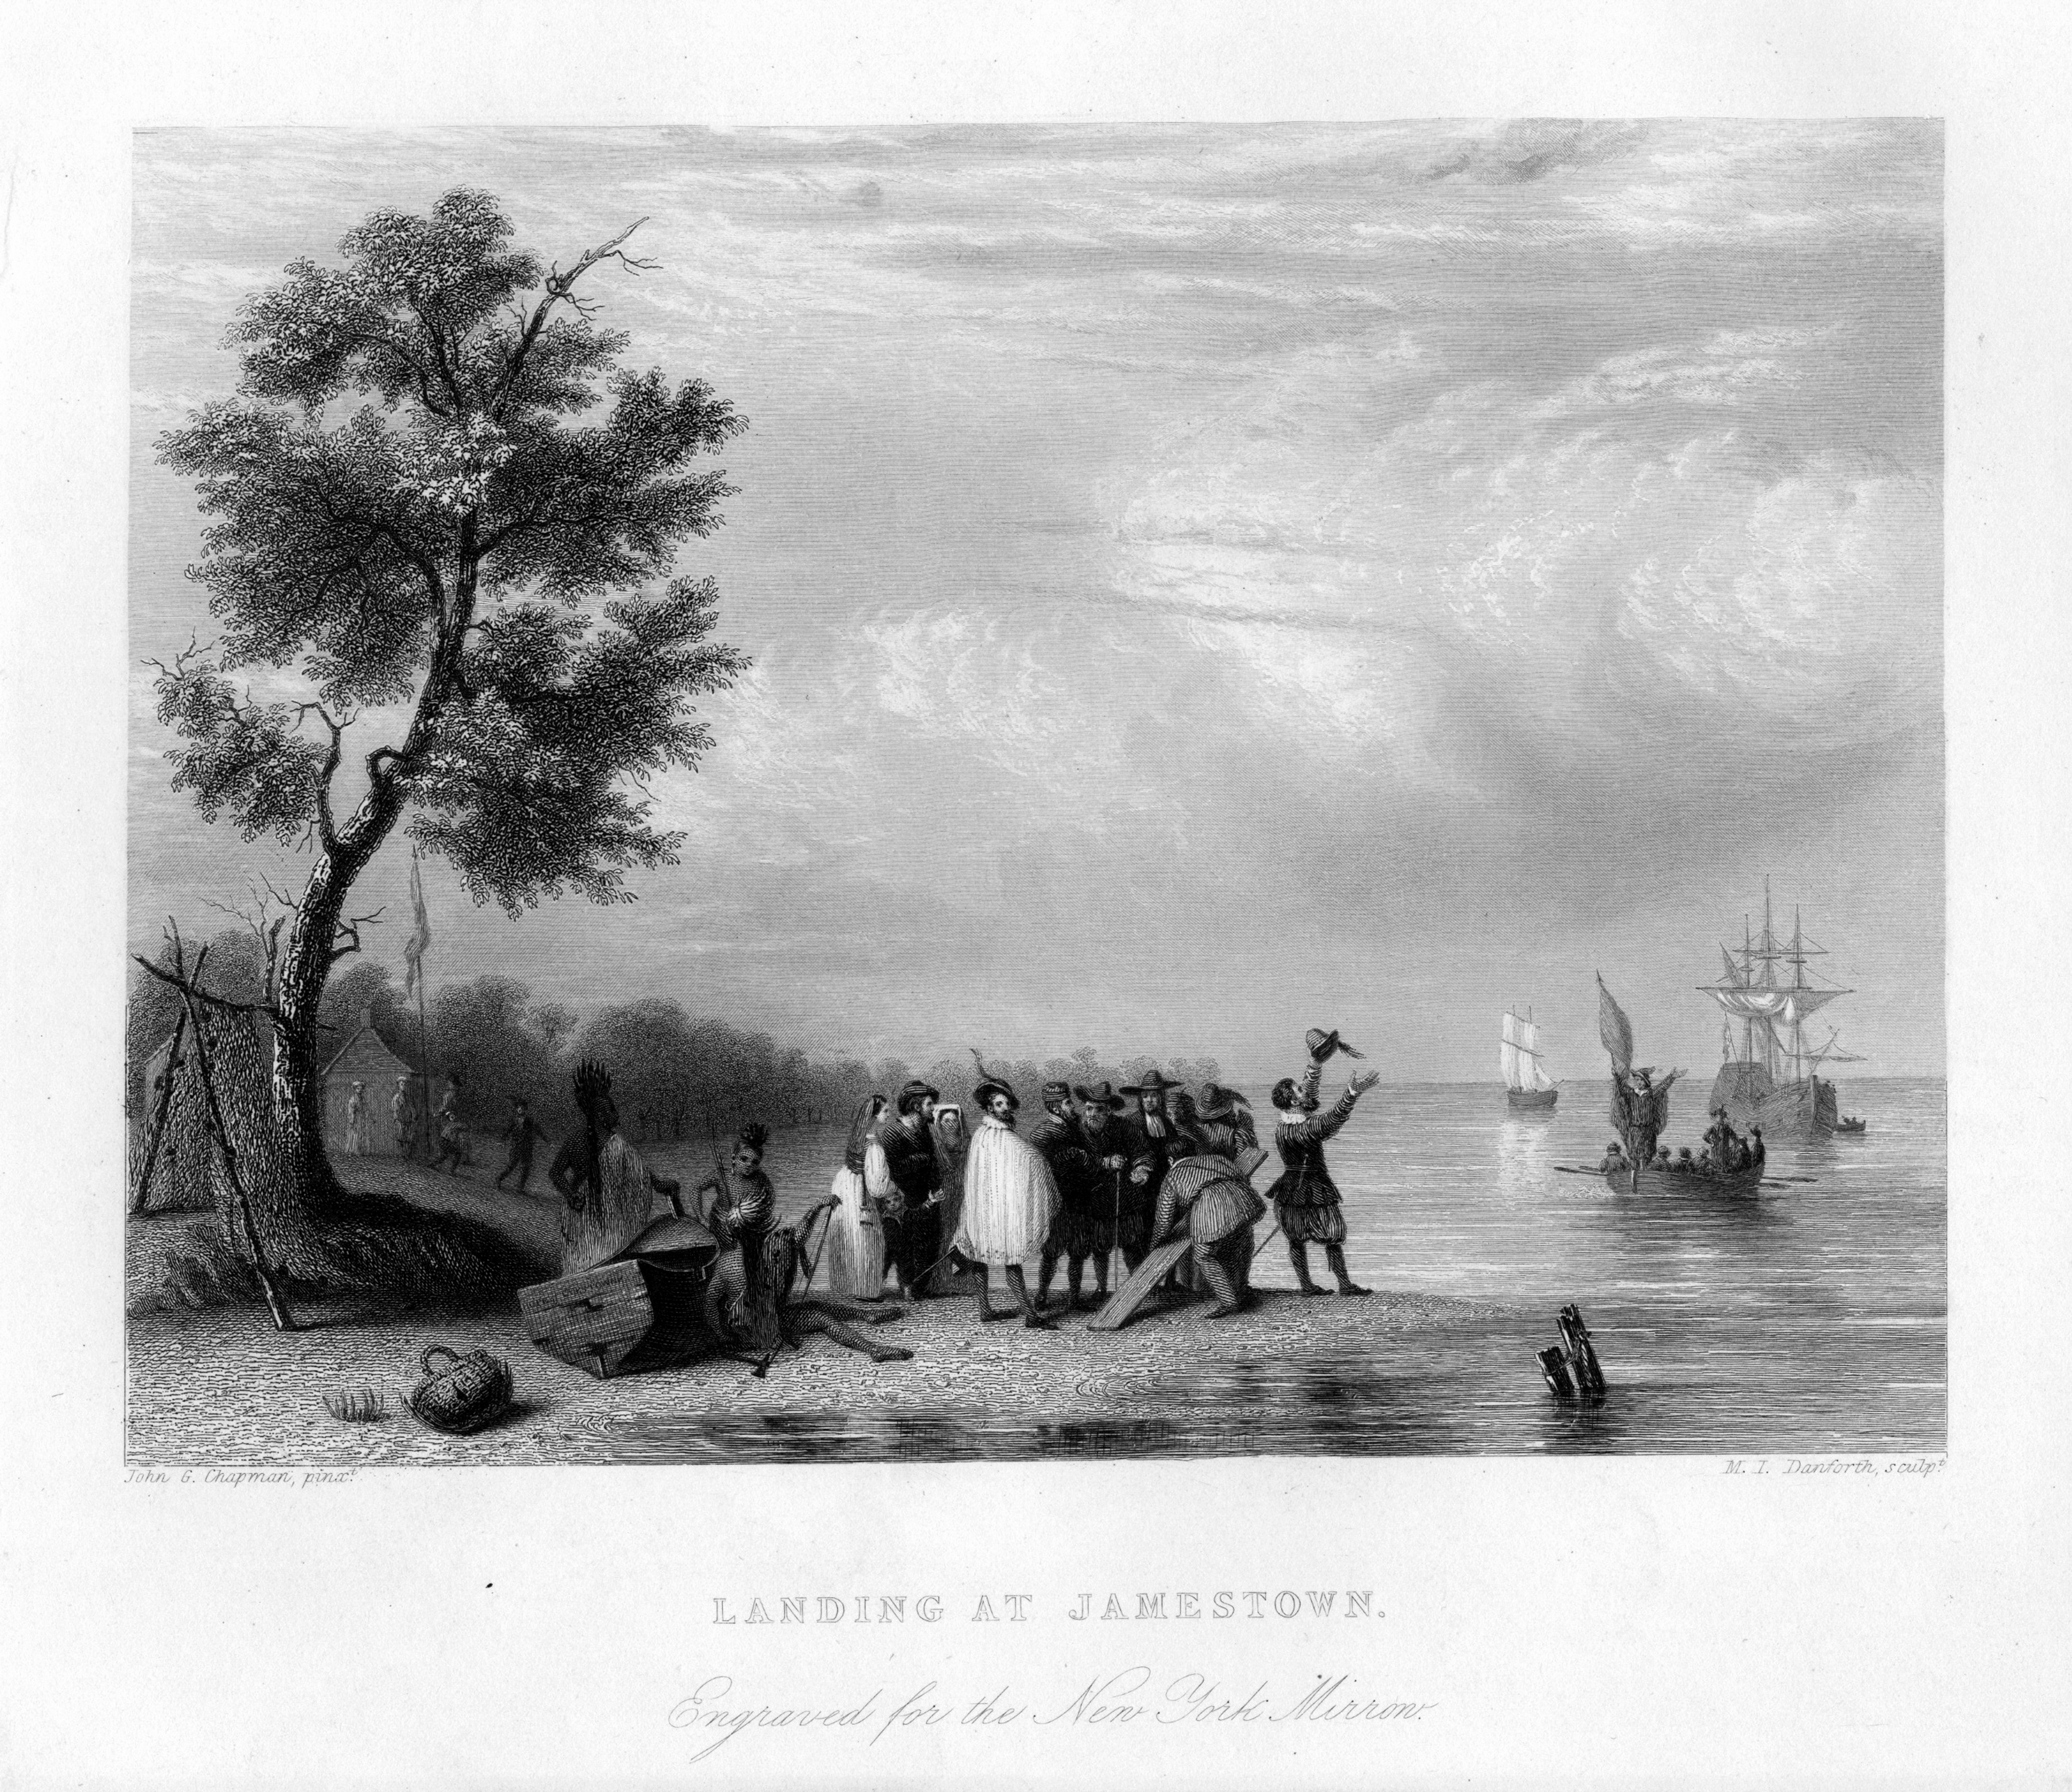 From the New York Public Library, an engraving from a painting depicting members of the Virginia Company of landing at Jamestown. Their larger ships can be seen anchored off of the coast while smaller boats are being used to bring men ashore; American Indians are assisting the men that are gathered on the shore. (Smith Collection/Gado/Getty Images)